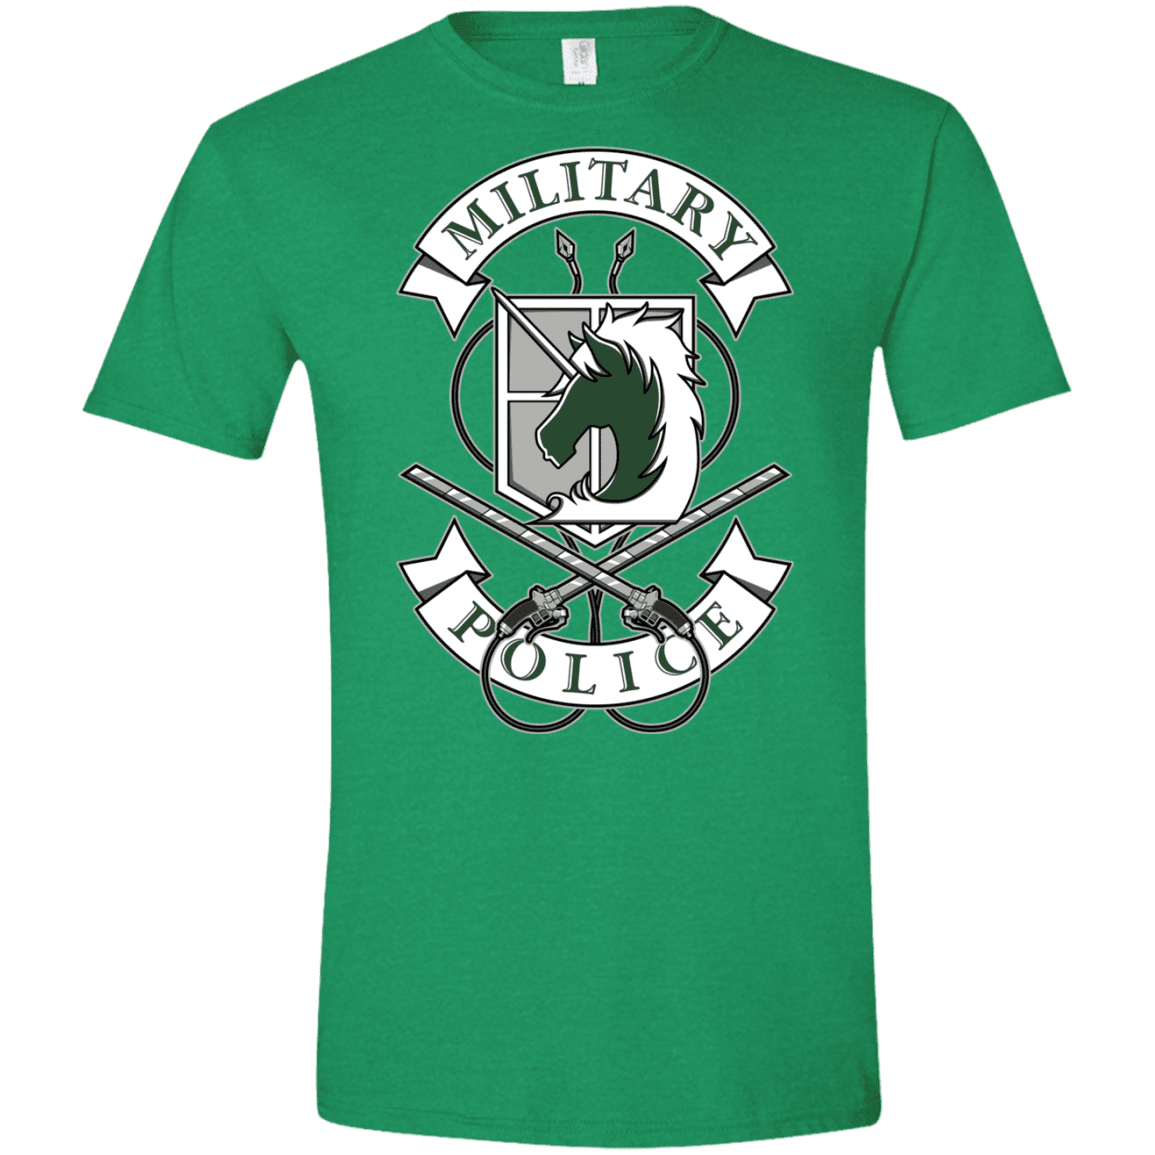 T-Shirts Heather Irish Green / S AoT Military Police Men's Semi-Fitted Softstyle